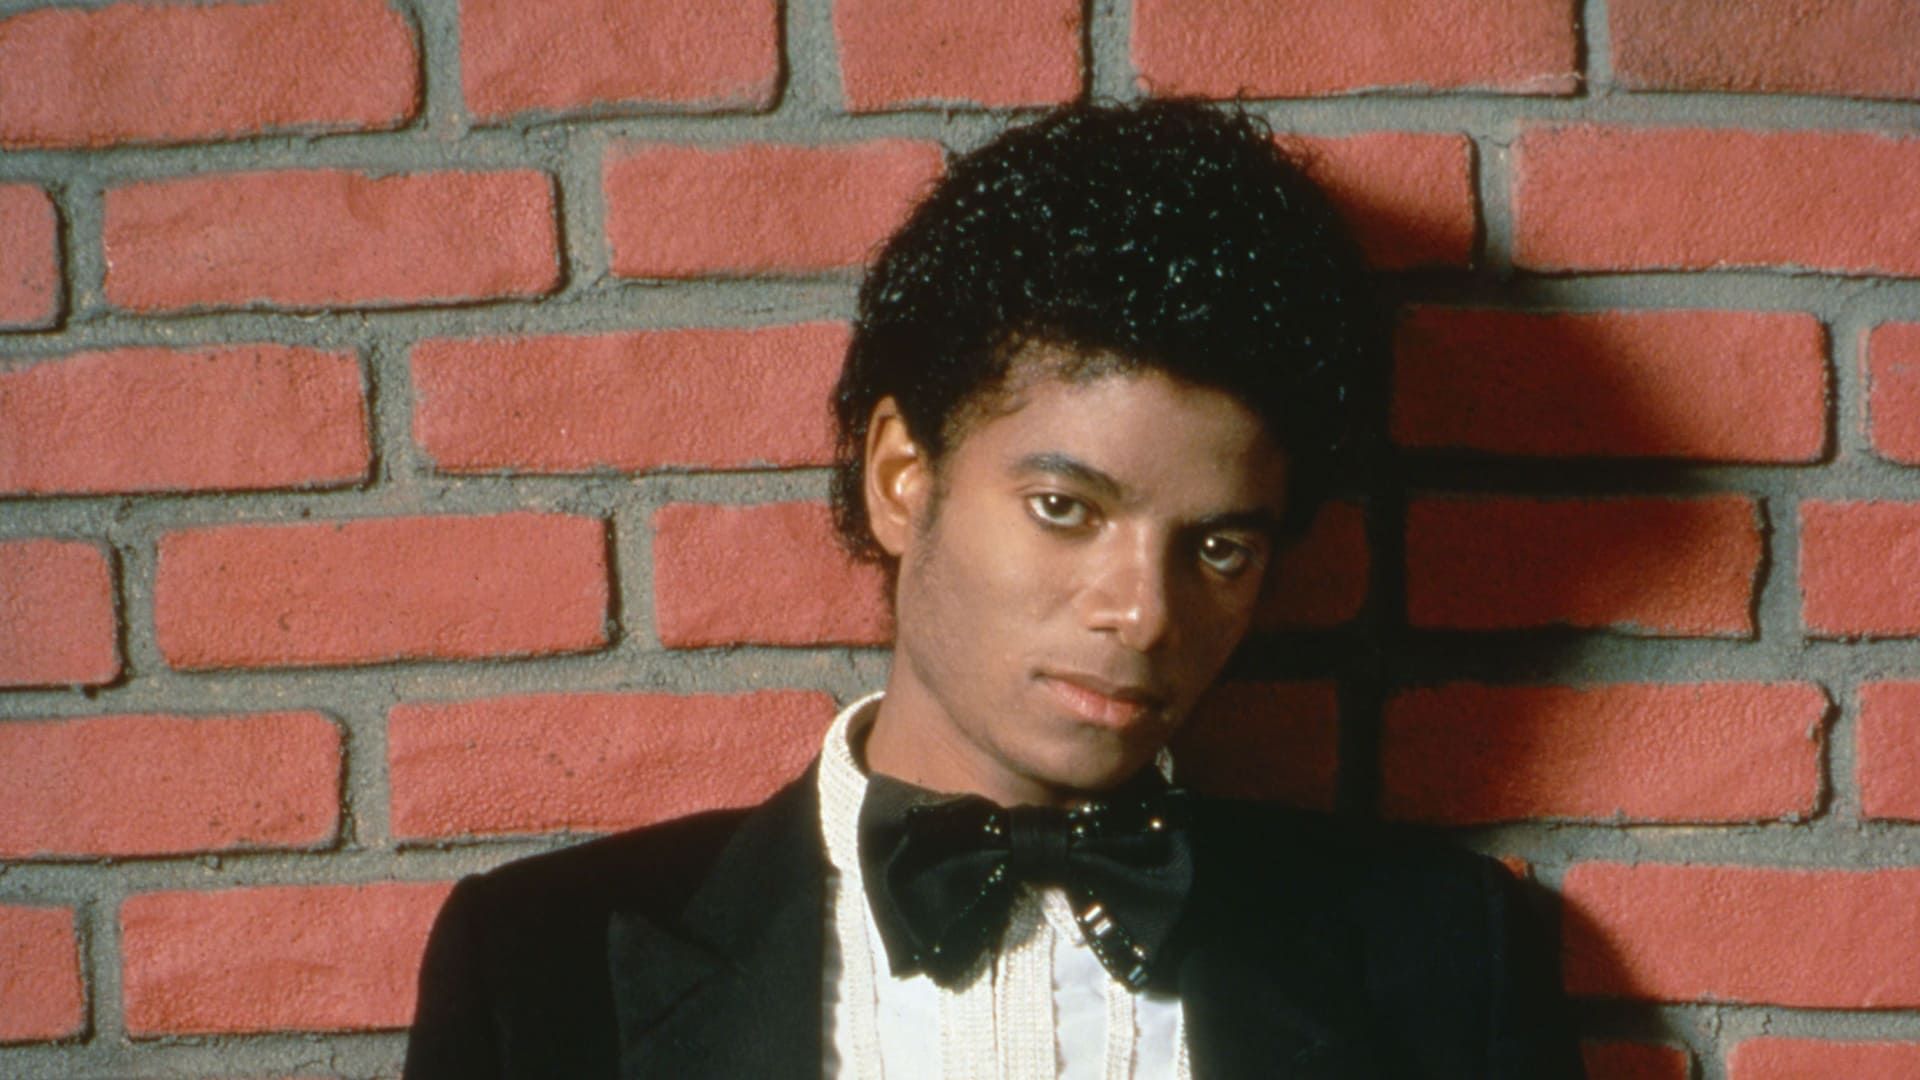 Michael Jackson's Journey from Motown to Off the Wall Backdrop